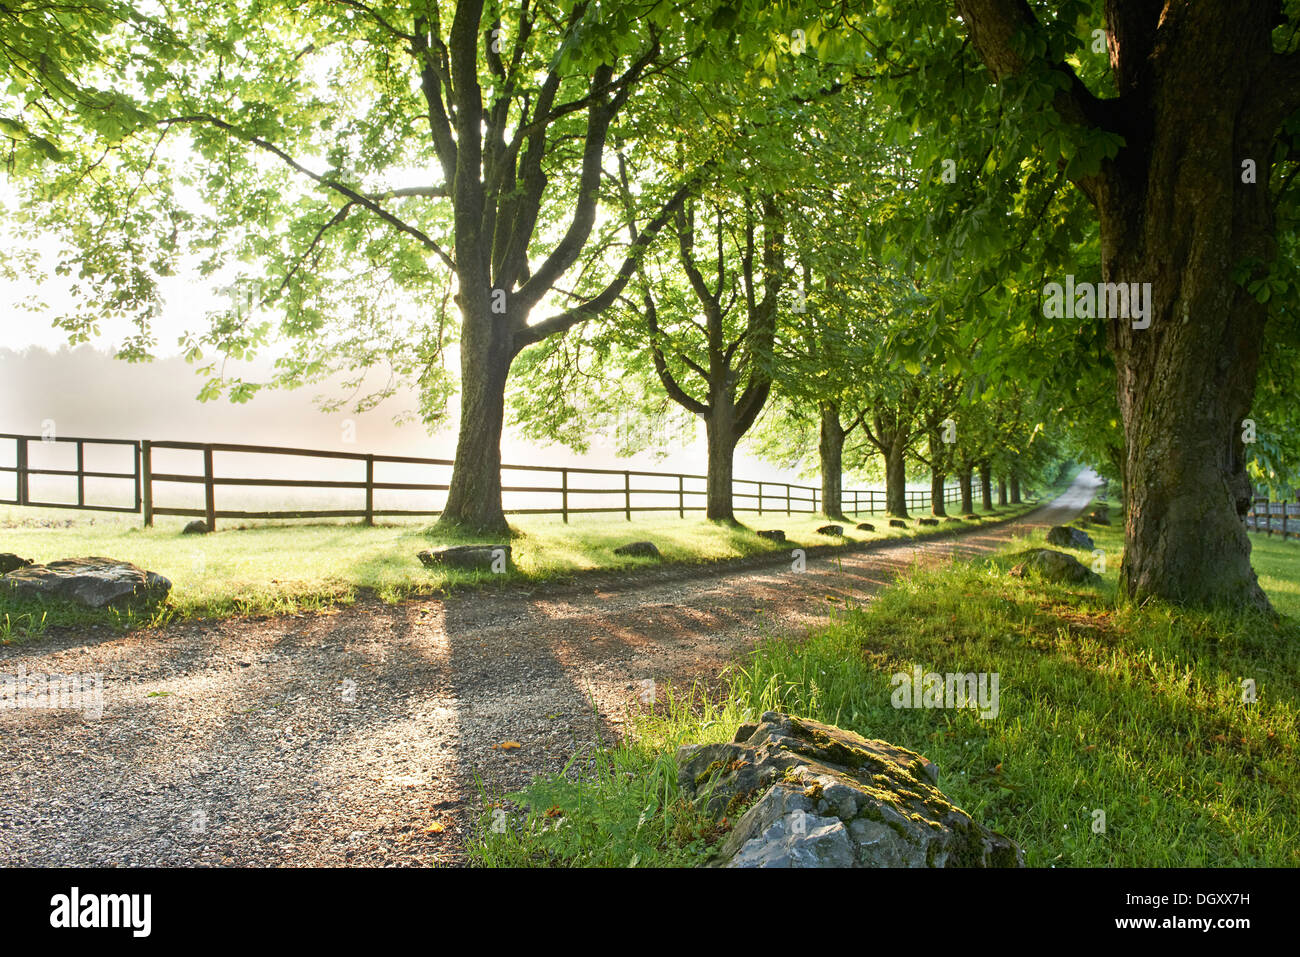 Road lined with old trees, with a paddock in the fog, Ammerland am Starnberger See, Münsing, Upper Bavaria, Bavaria, Germany Stock Photo